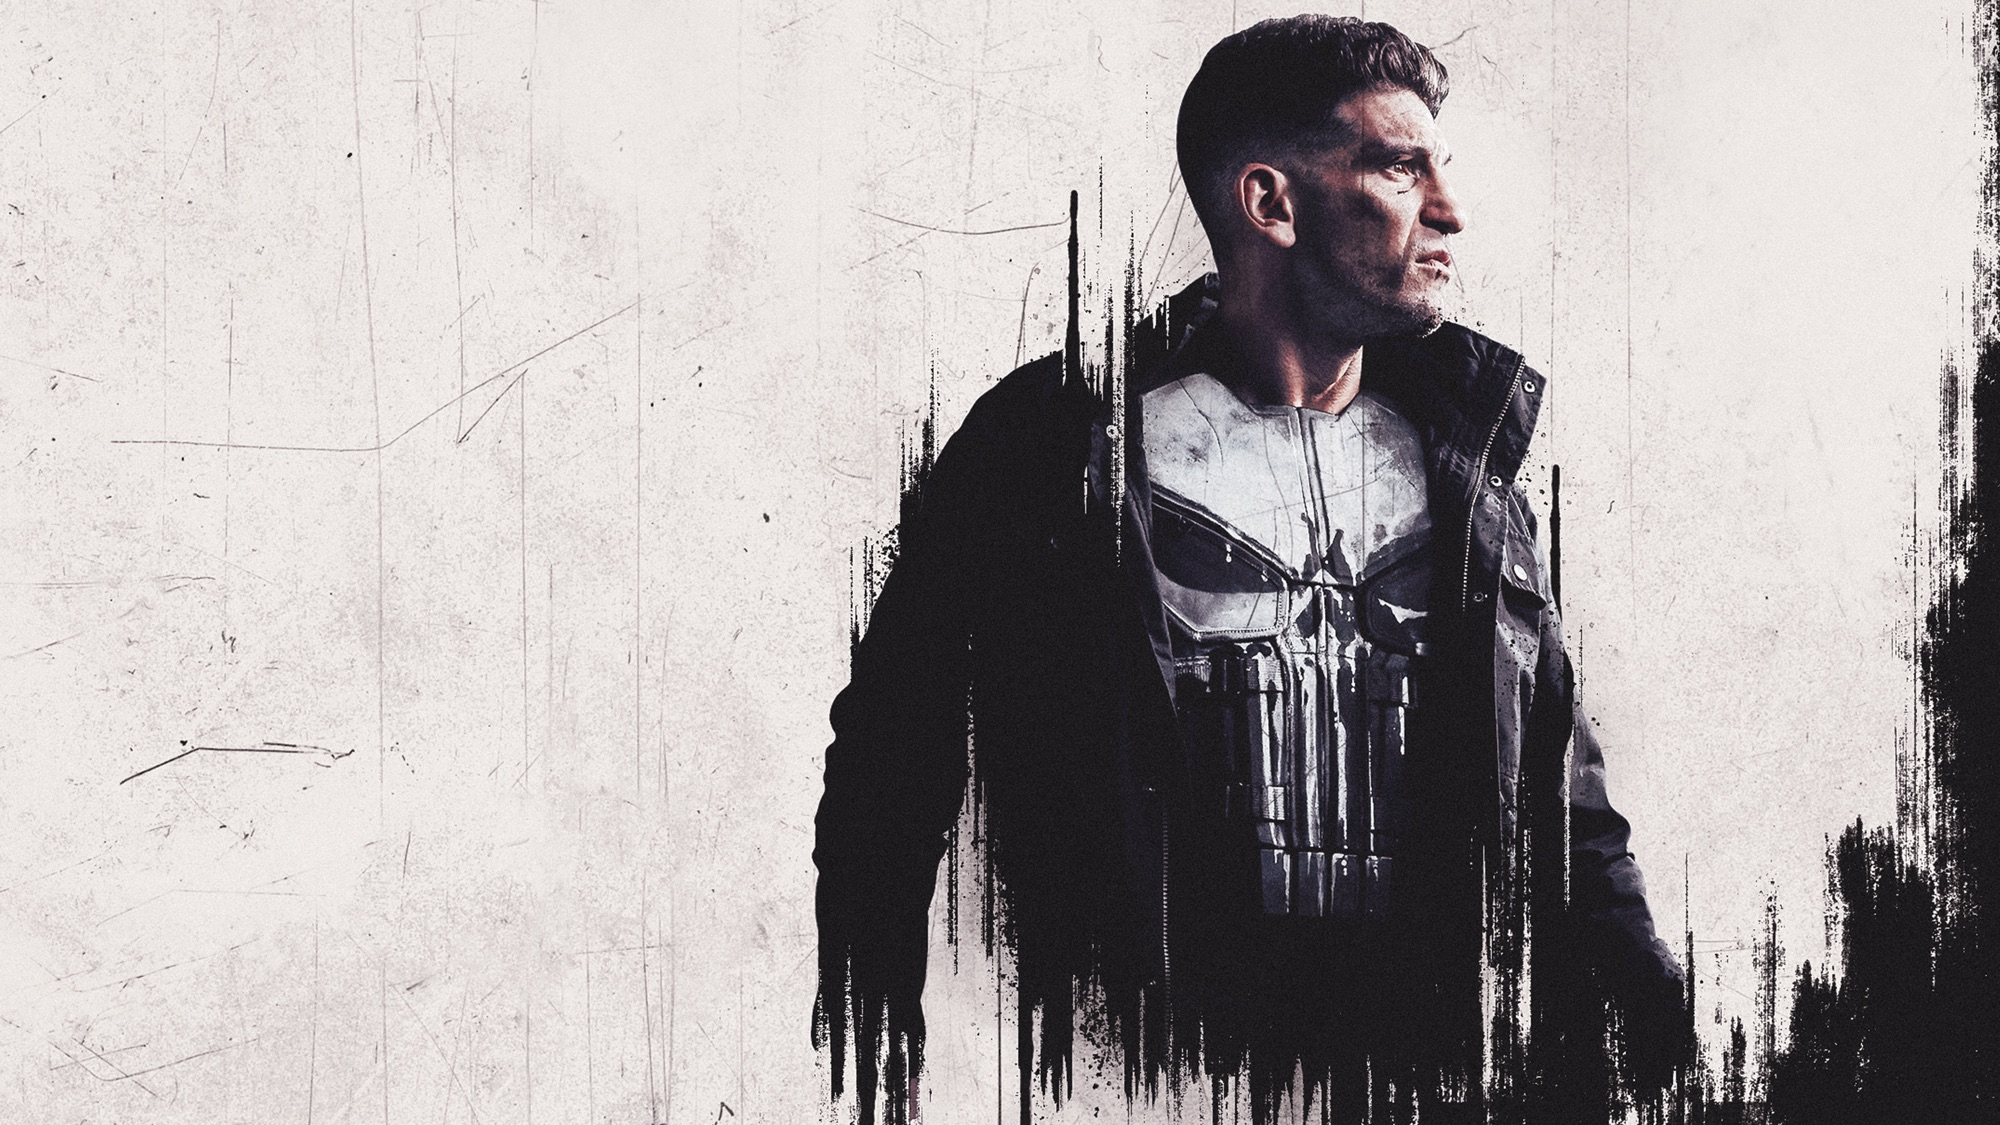 2000x1125 10+ The Punisher HD Wallpapers and Backgrounds